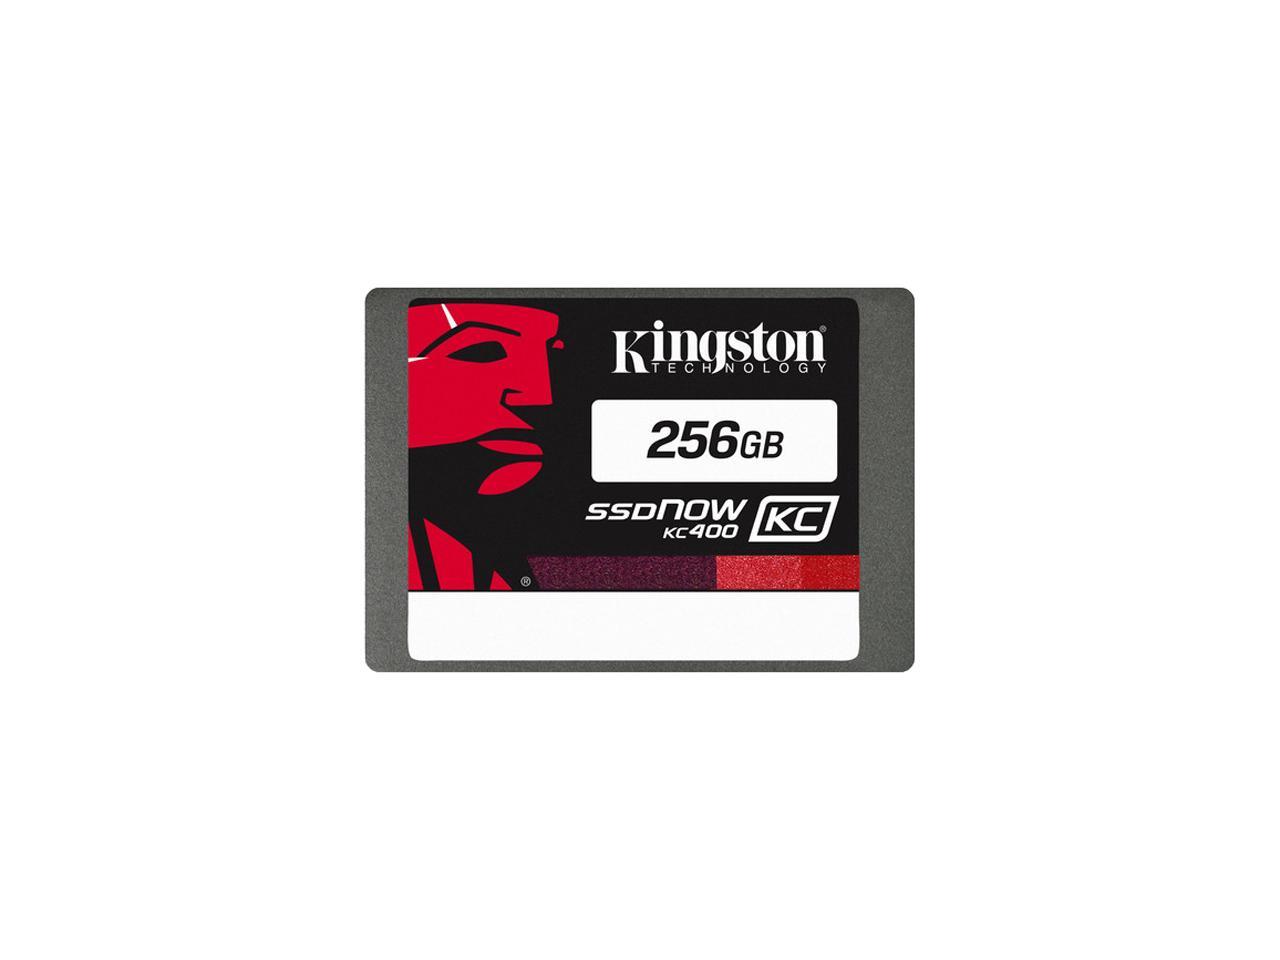 Kingston Ssdnow Kc400 Skc400S37/256G 2.5" 256Gb Sata Iii Business Solid State Disk